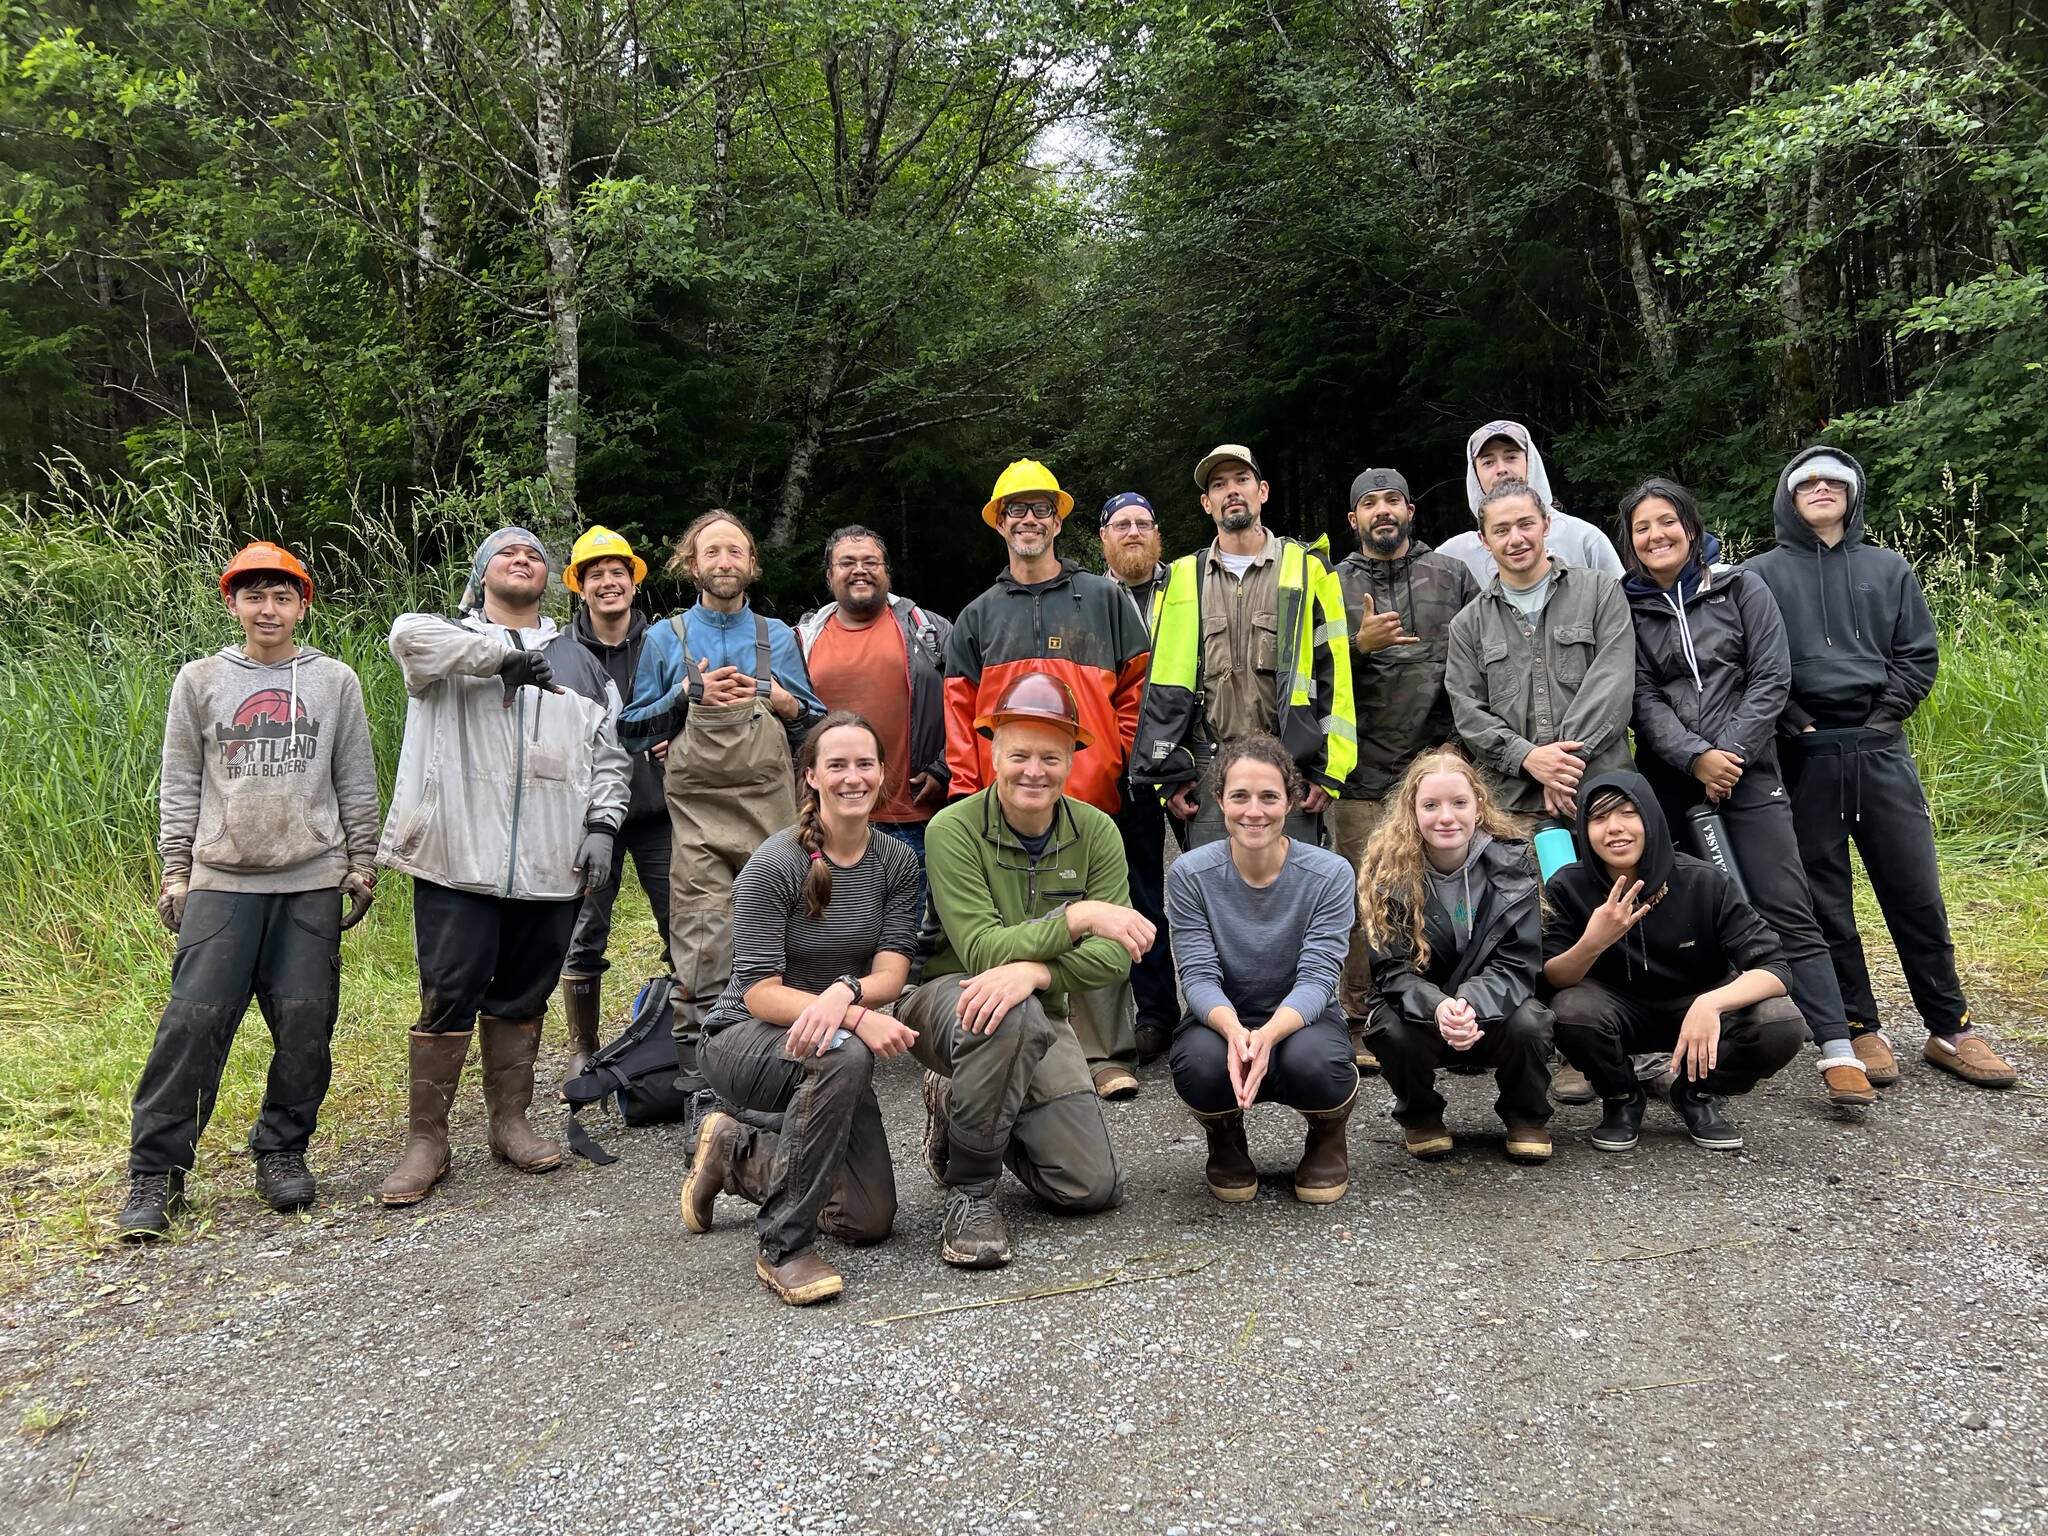 Crew from the Southeast Alaska Watershed Coalition, the Klawock Indigenous Stewards Forest Partnership, Keex’ Kwáan, and the Alaska Youth Stewards all helped with projects restoring fish habitat and stream structure at Seven Mile Creek, Klawock Heenya property just outside Klawock Lake. The area’s old growth was clearcut logged in 1987. (Courtesy Photos / Mary Catharine Martin)